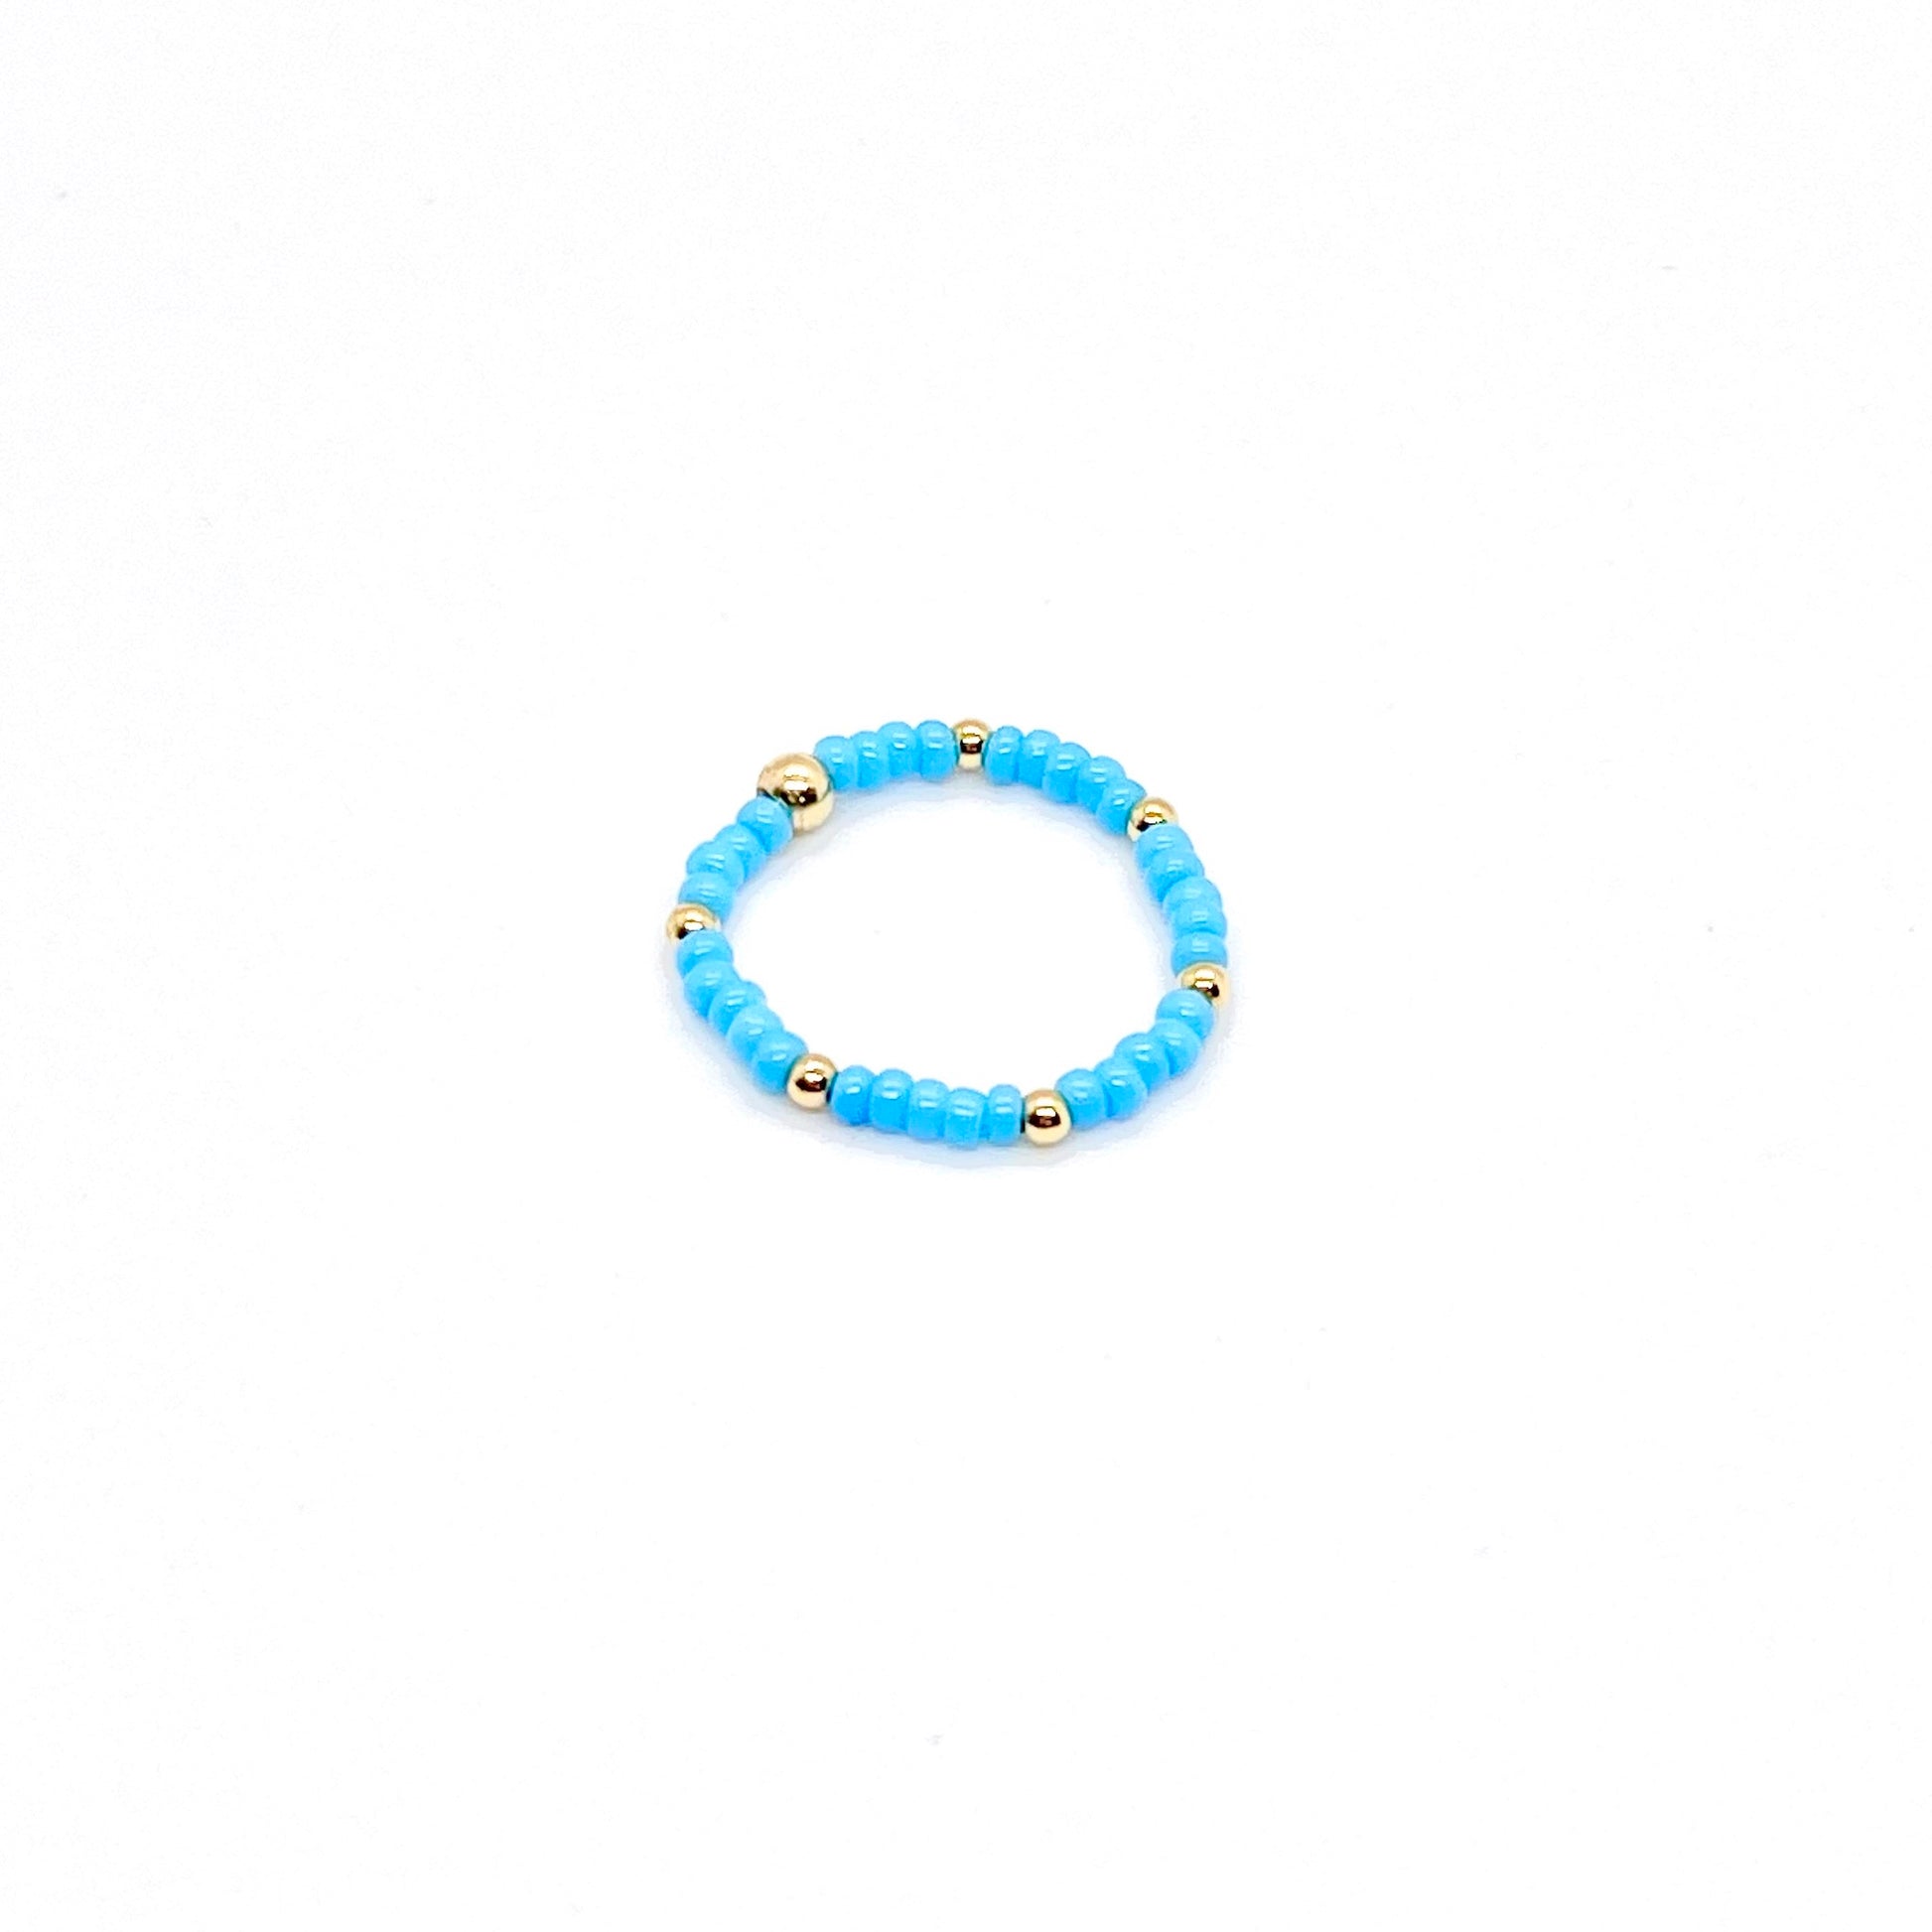 Stretch ring with blue seed beads and 14K gold filled ball accent beads.